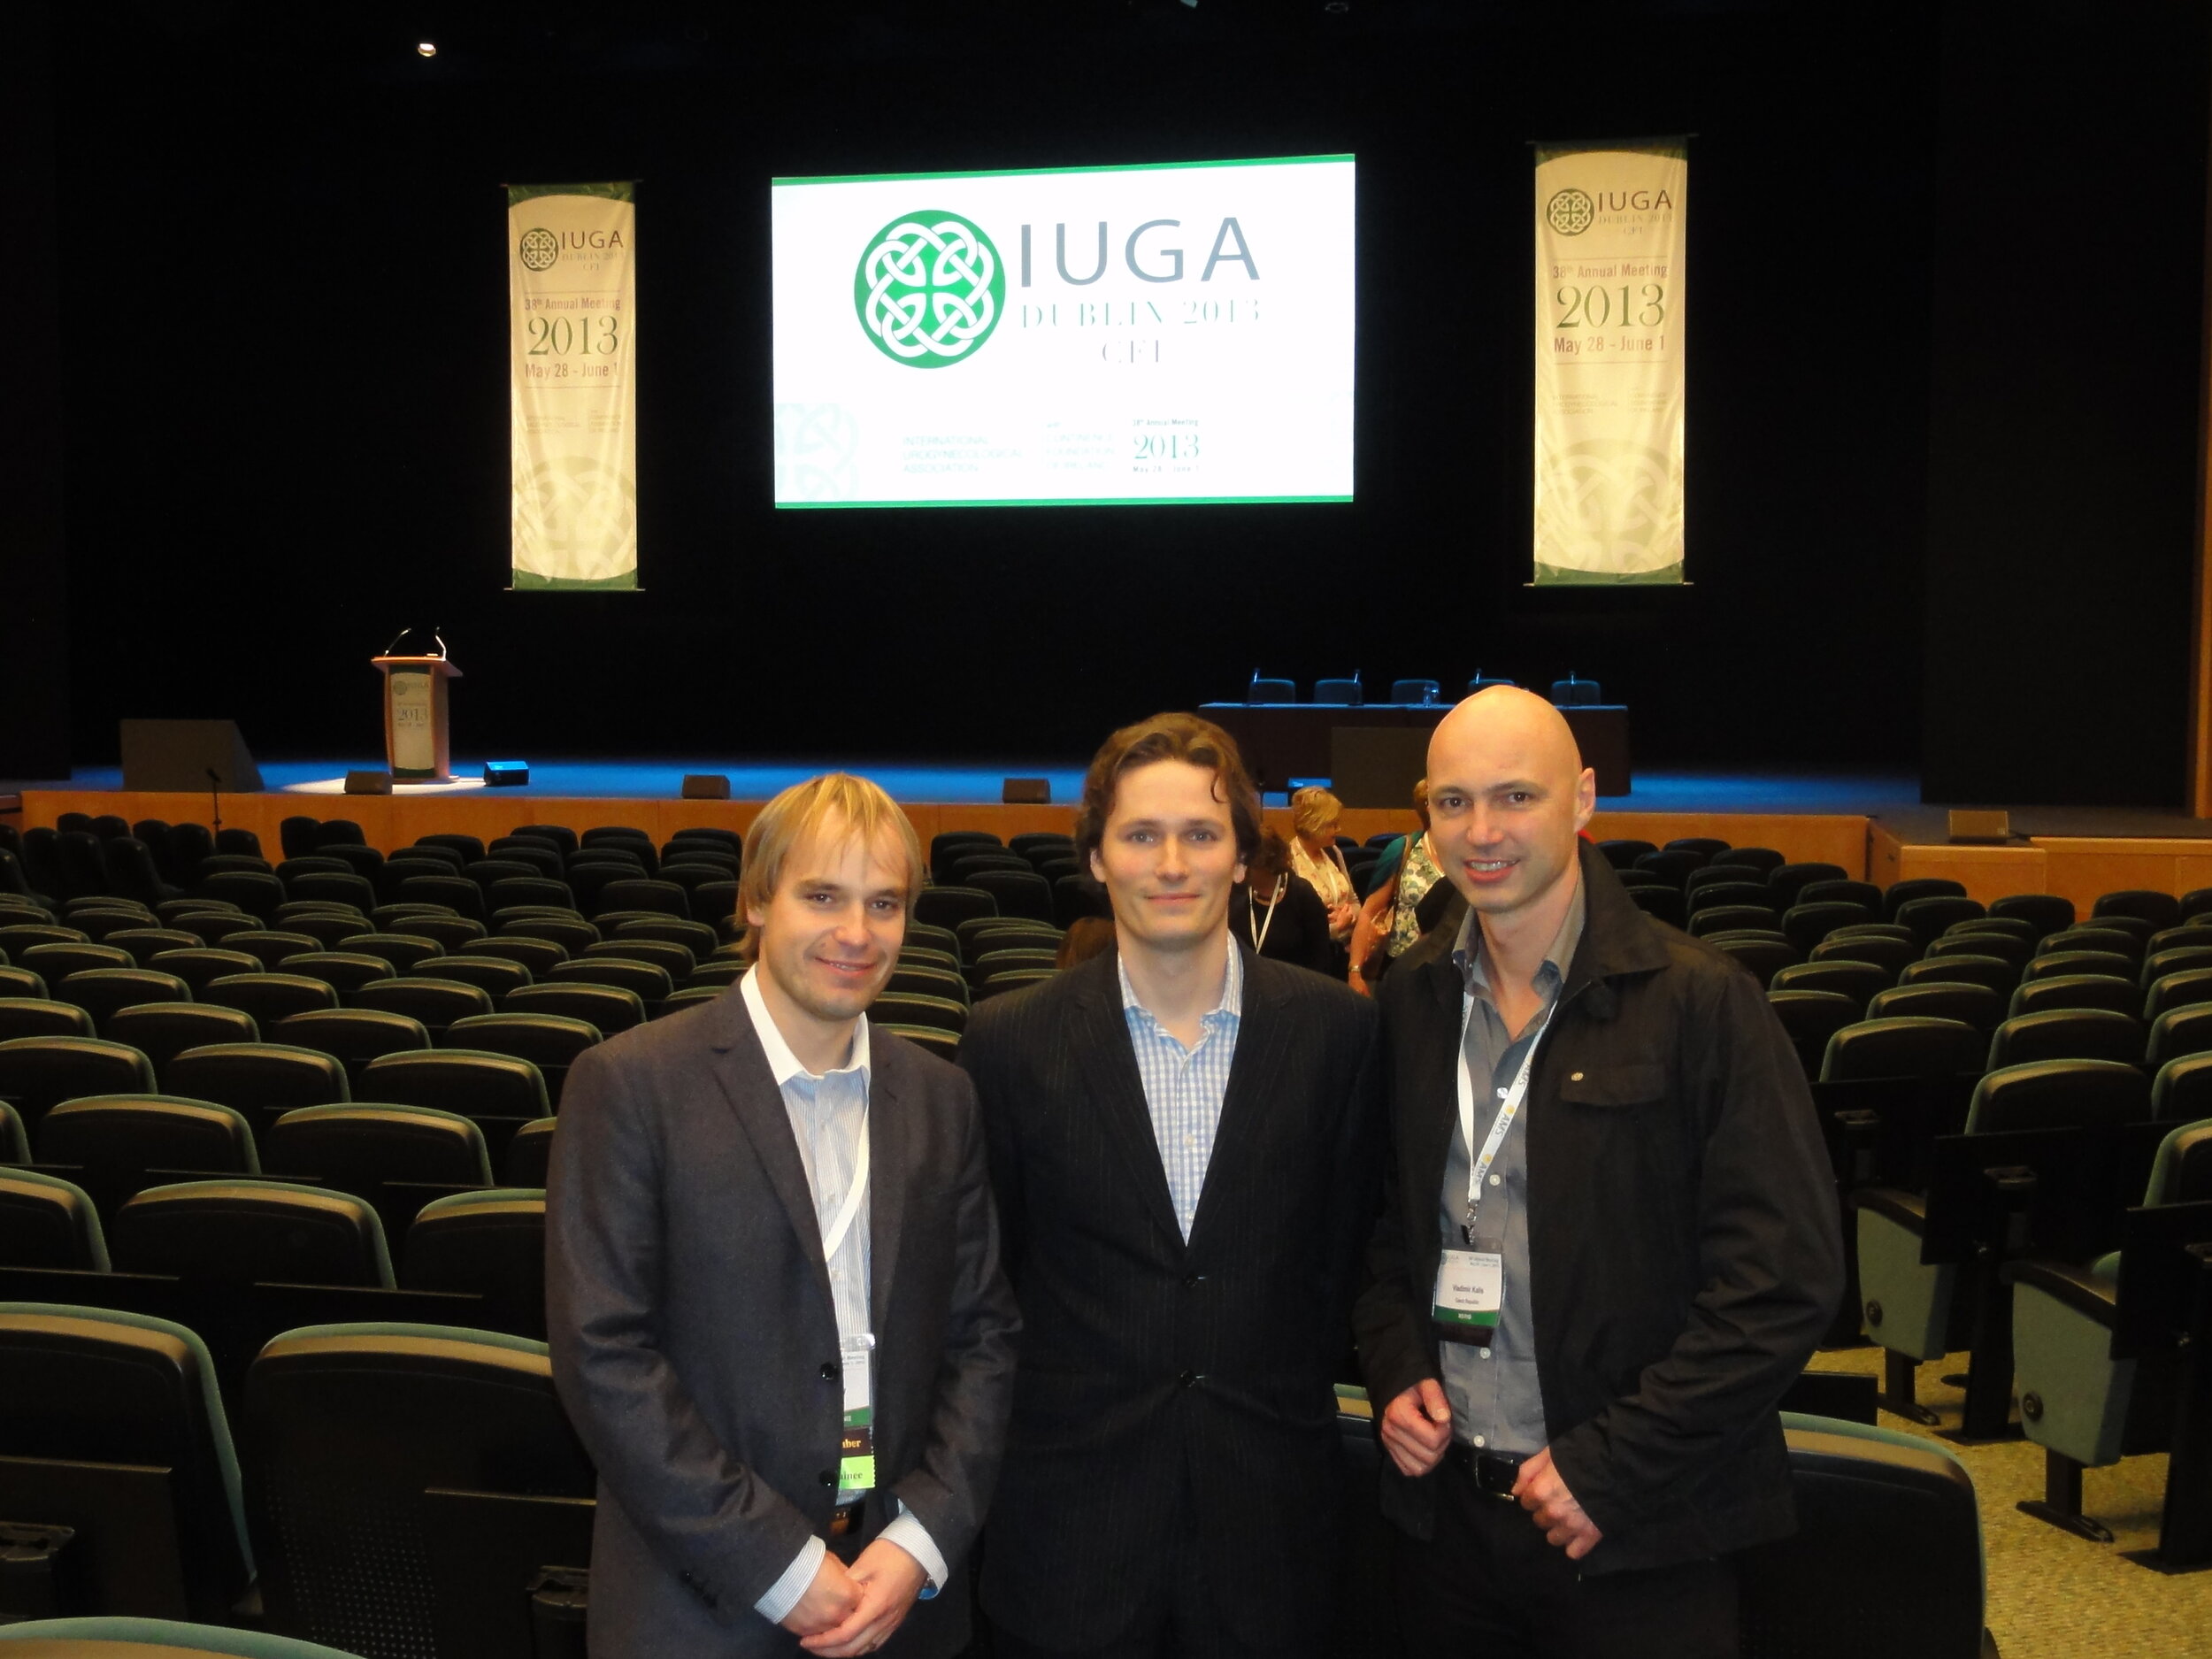 2013 - World Urogynecological Congress in Dublin; personal appreciation for our performance from the International Evaluation Committee